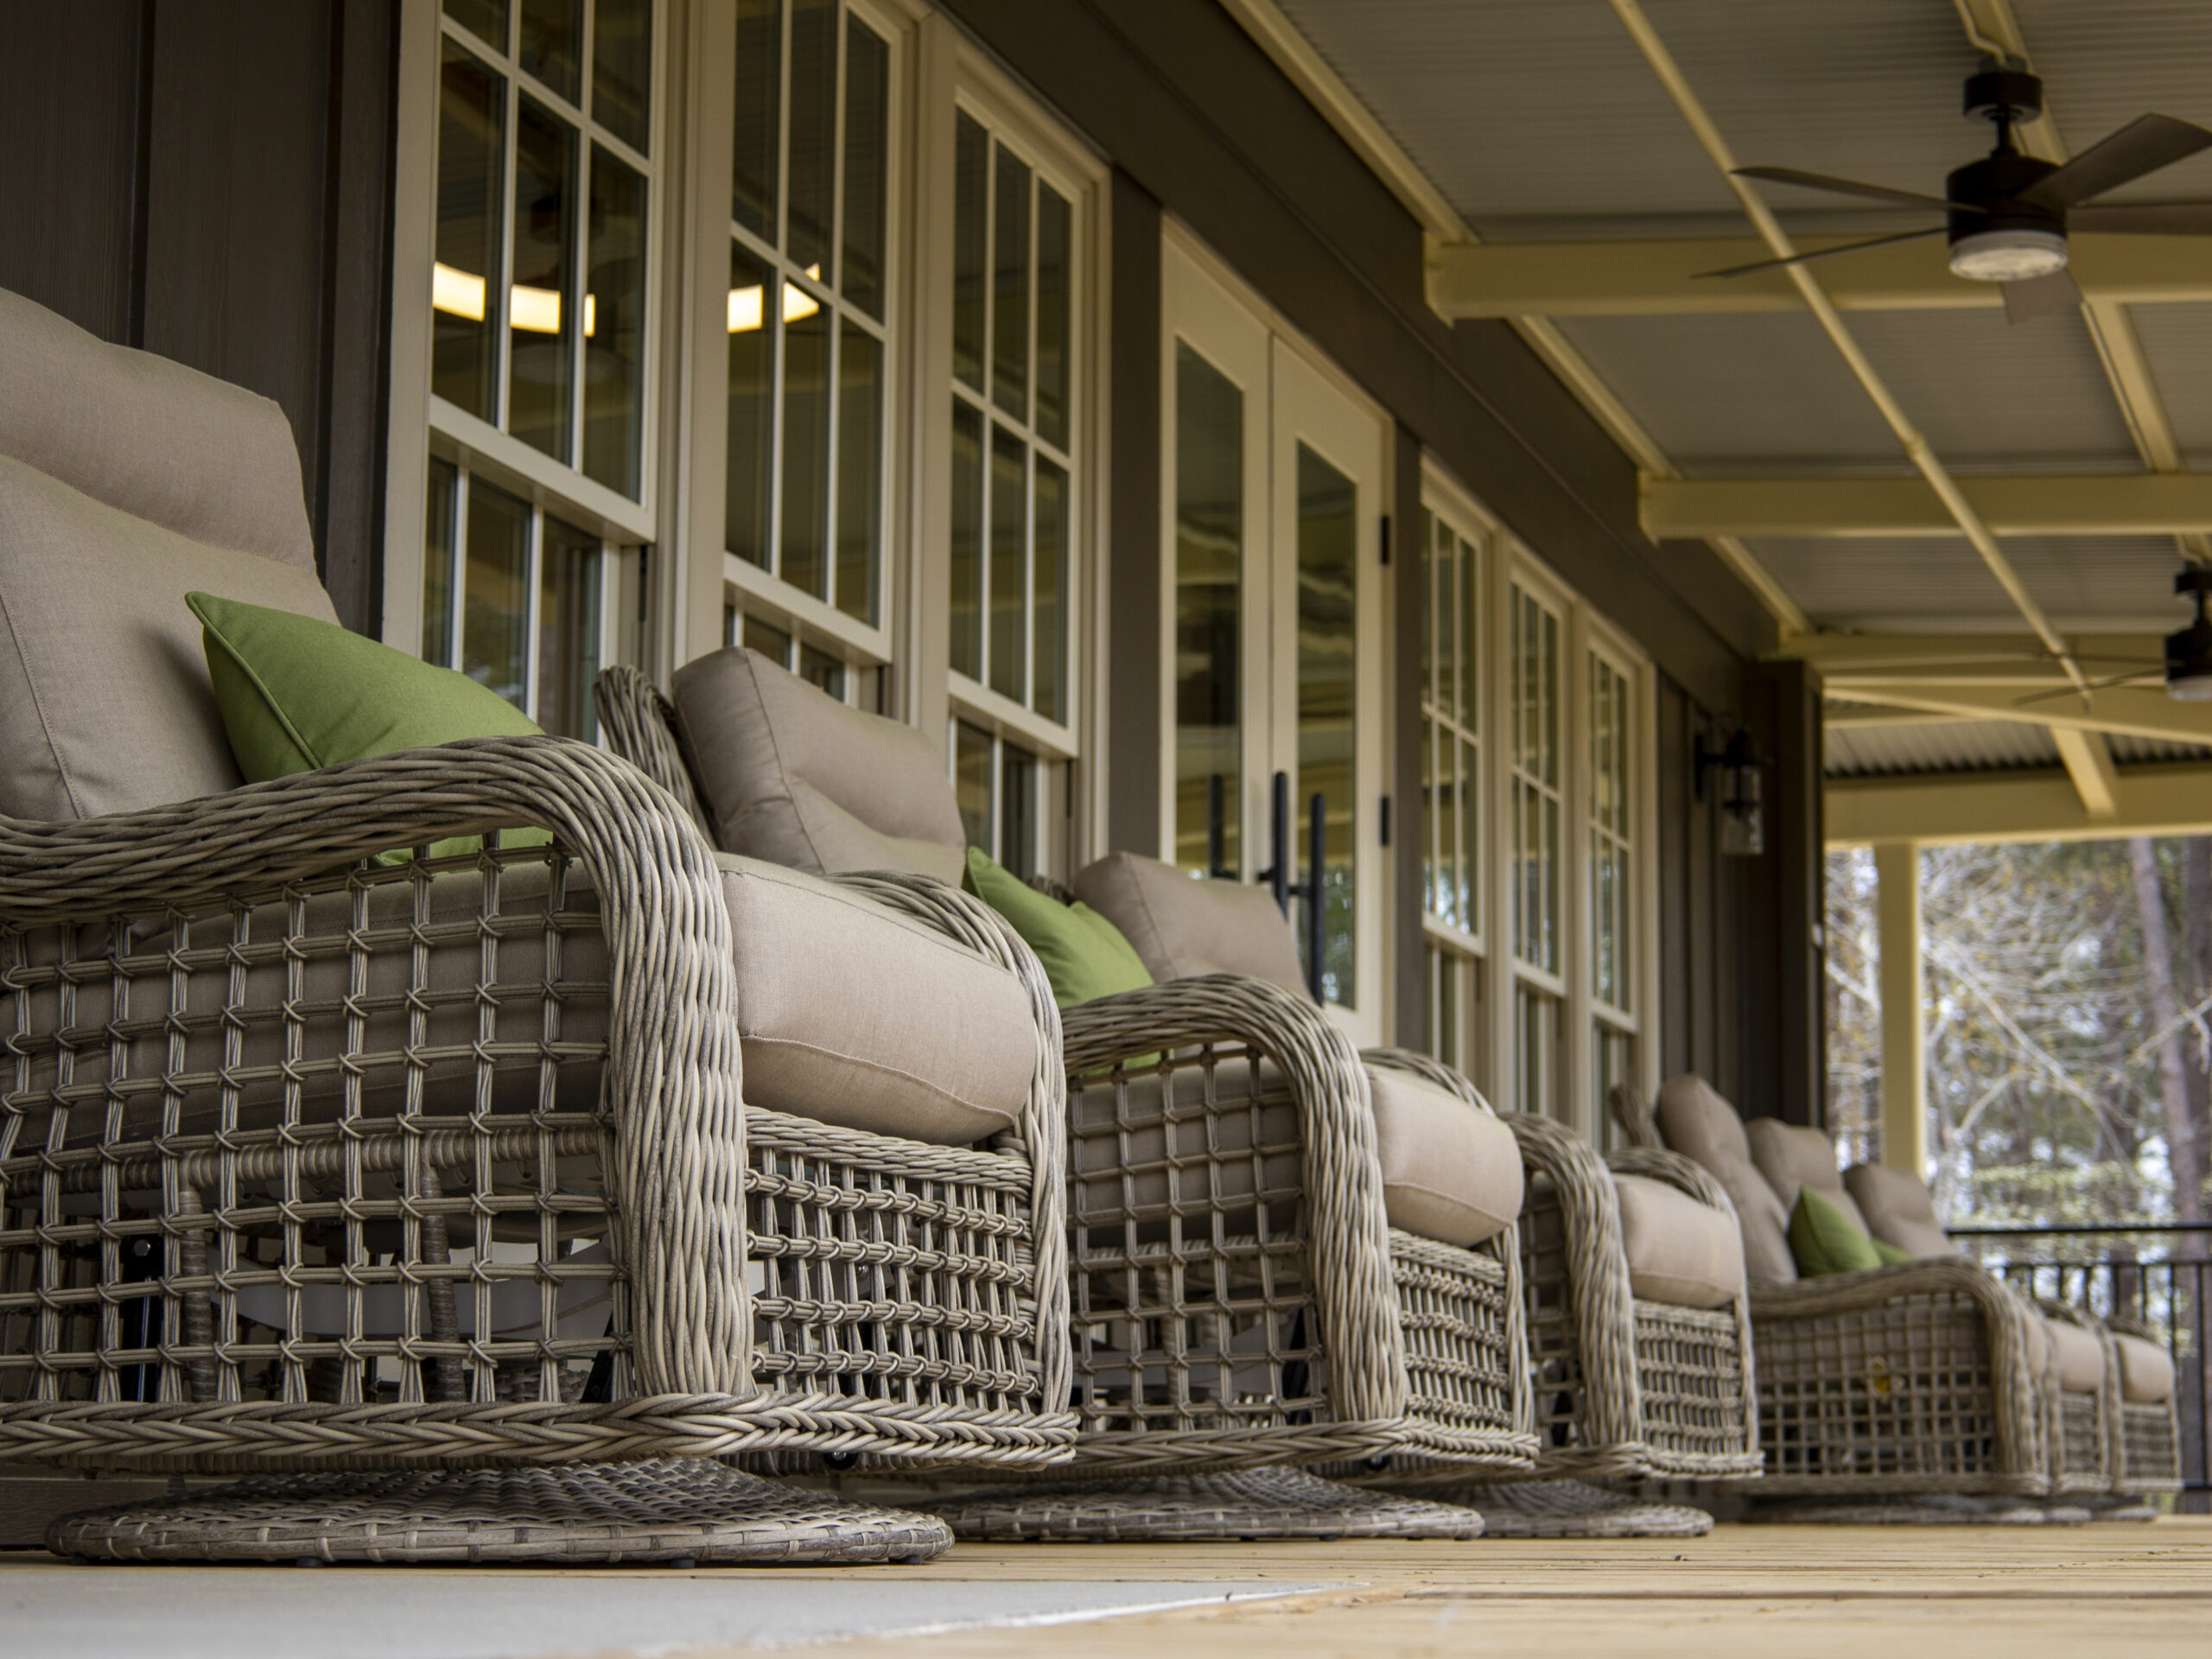 wicker chairs on the porch